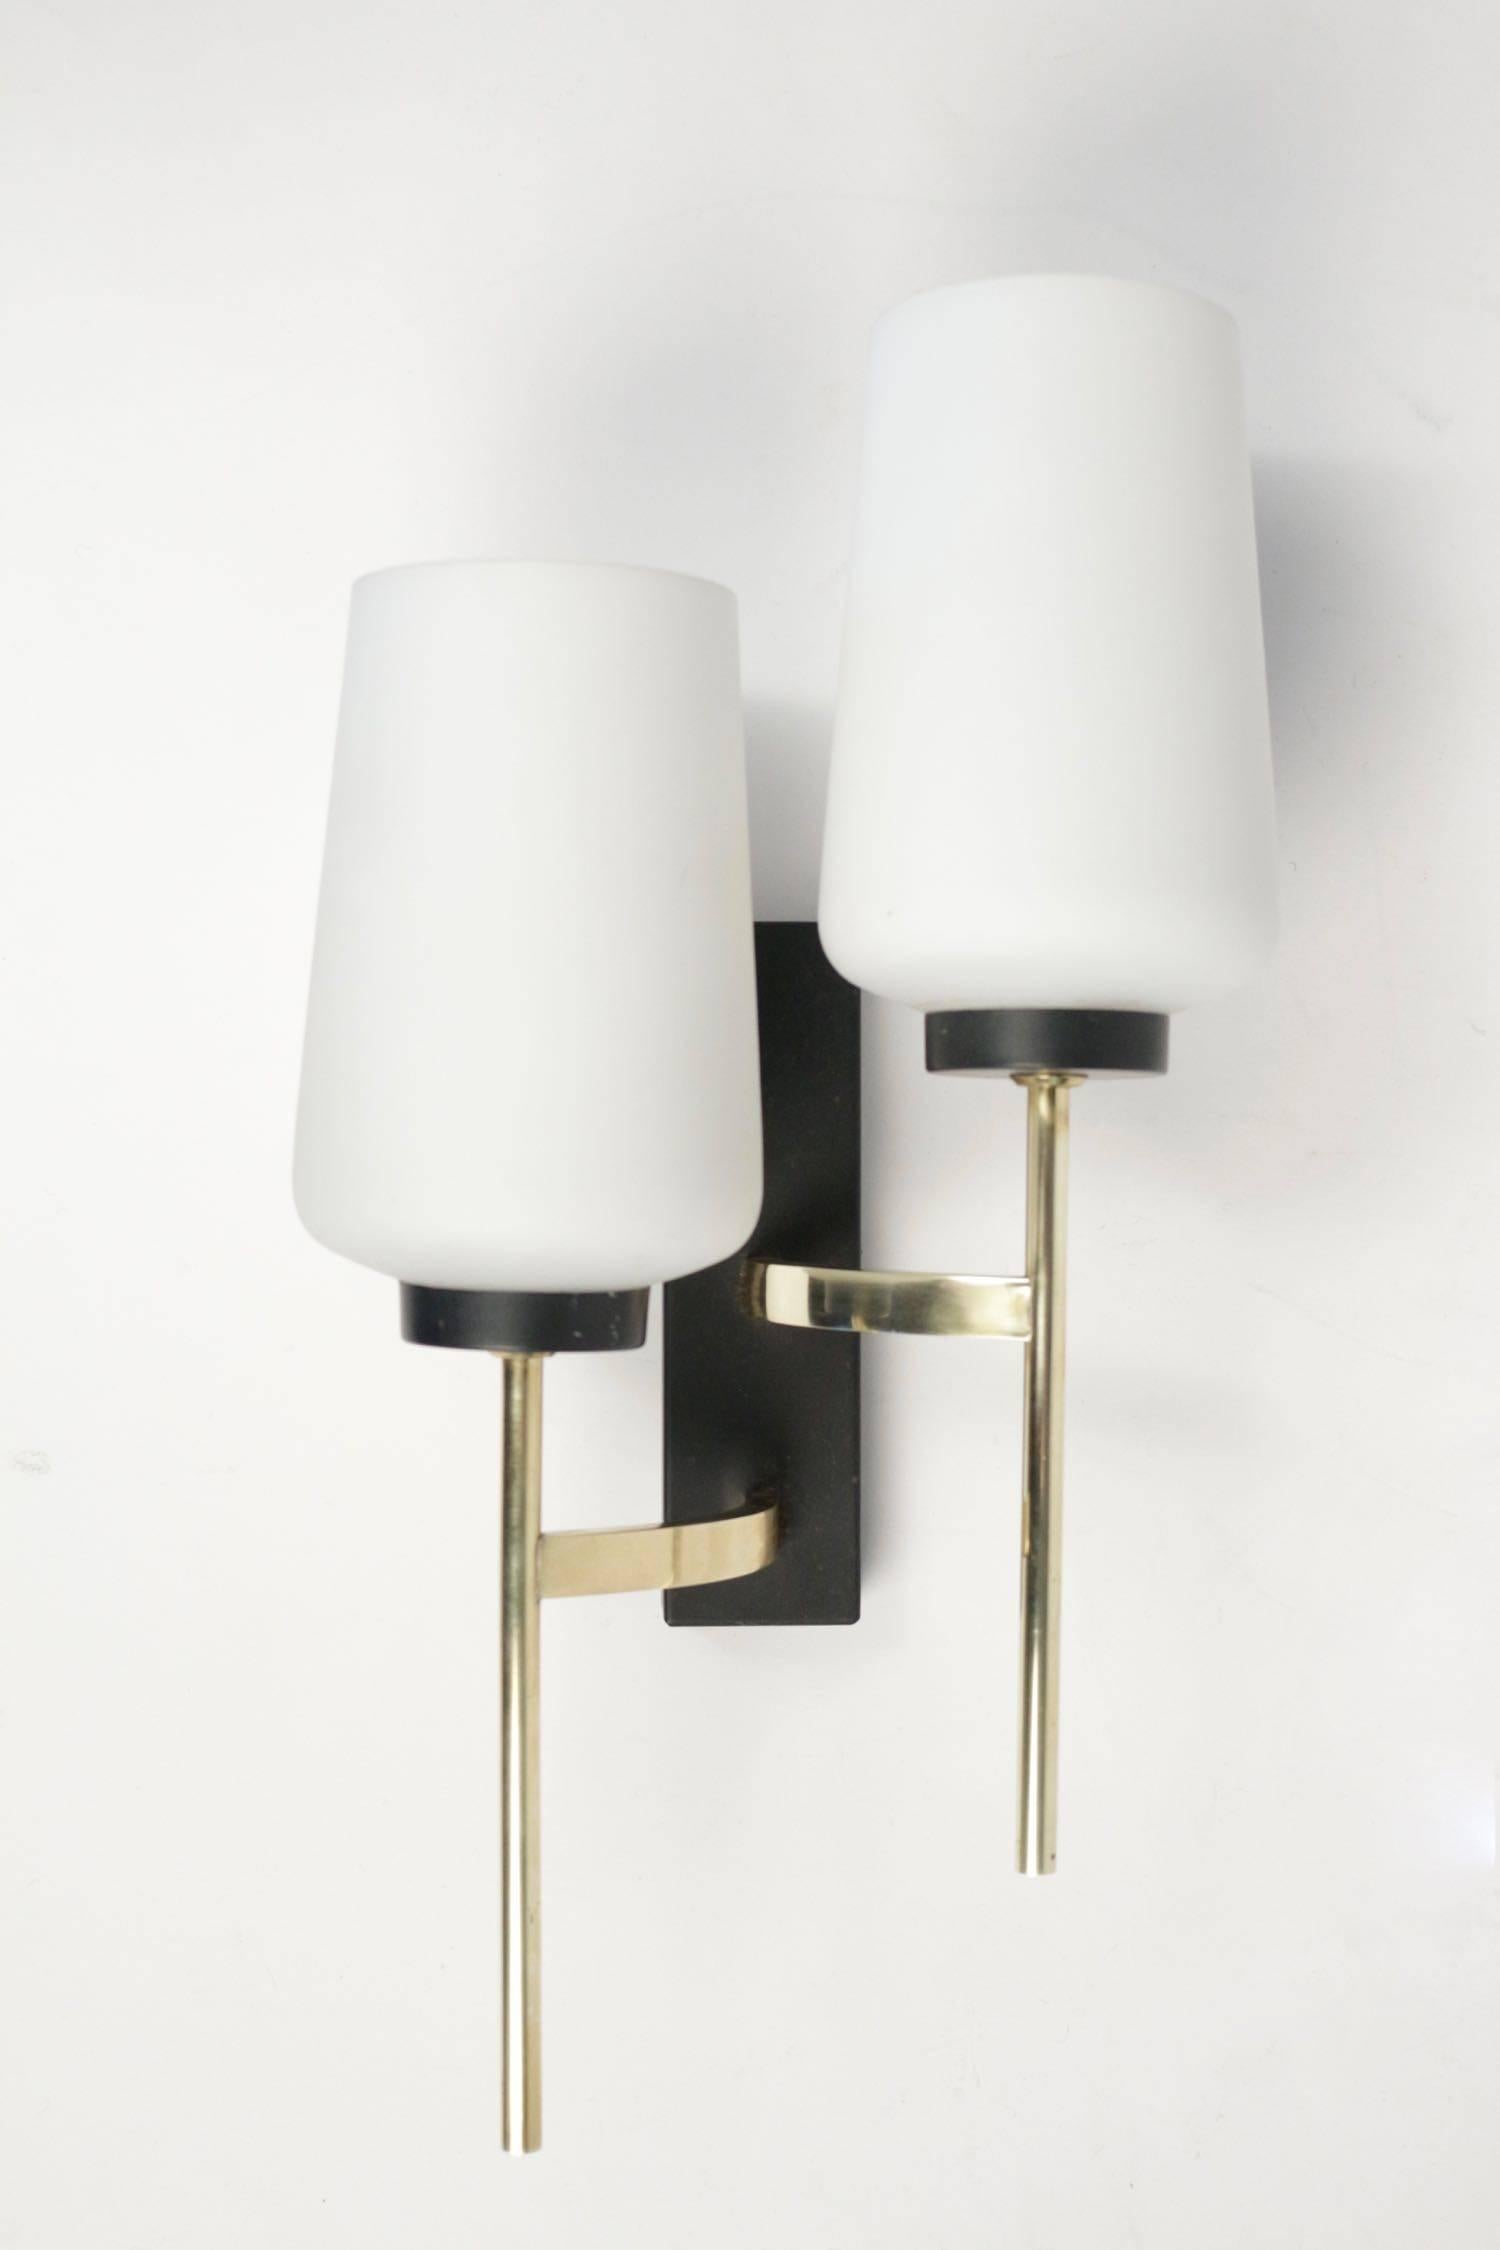 Pair of 1950s asymmetrical sconces by Maison Arlus.
Composed of two gilt brass arms decorated with opaline linked by a gilt brass rod to a black rectangular base.
Two lighted arms per sconce.